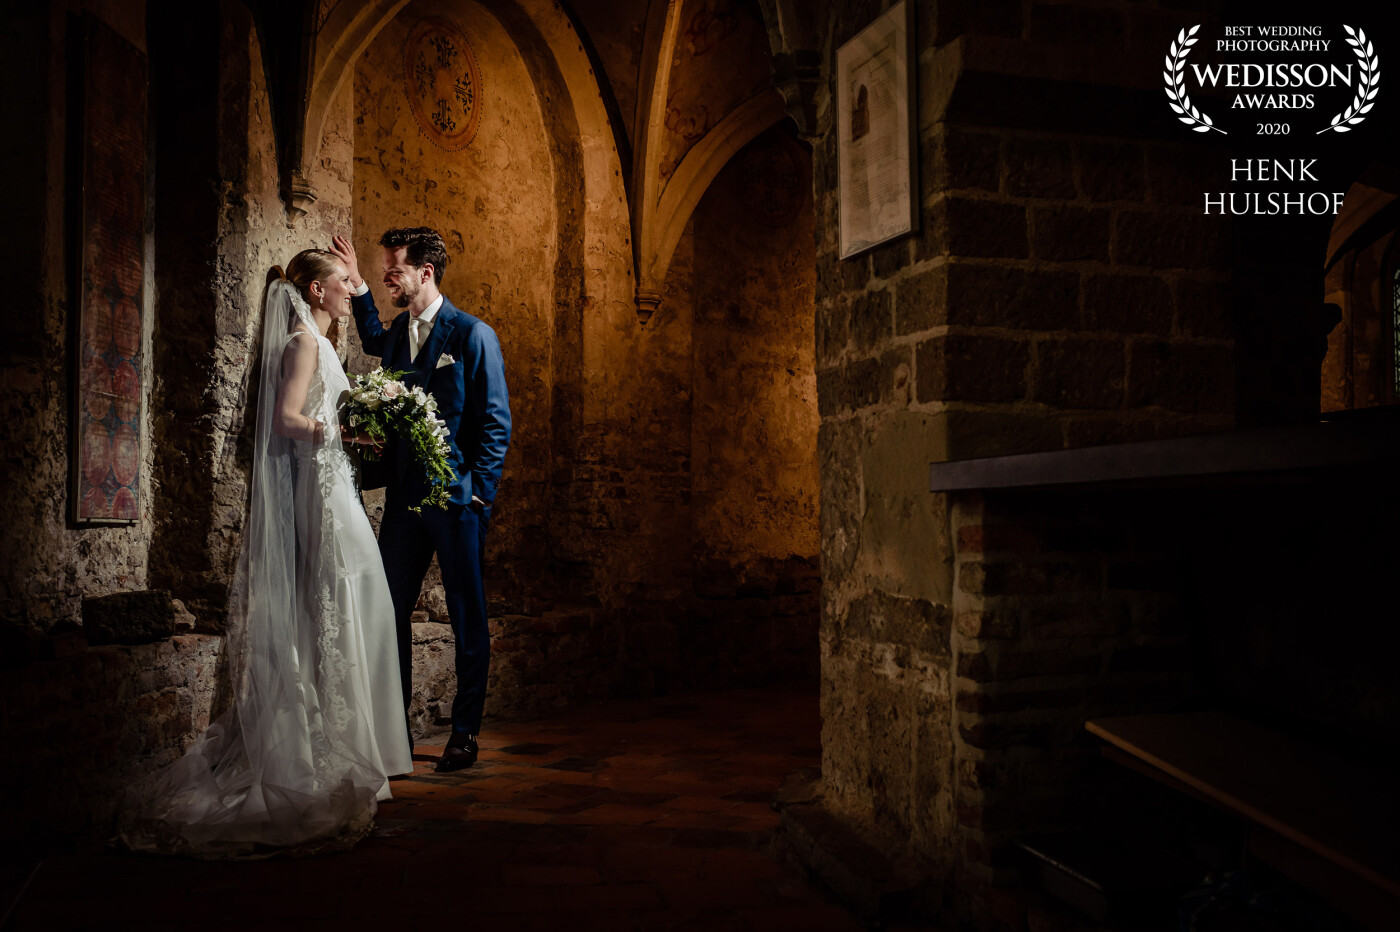 I had the honor to shoot the fantastic wedding of Mark & Marijke on 'leap day' this year! This shot was taken a few minutes after their 'first see', inside this lovely 'Valkhof chappel'.